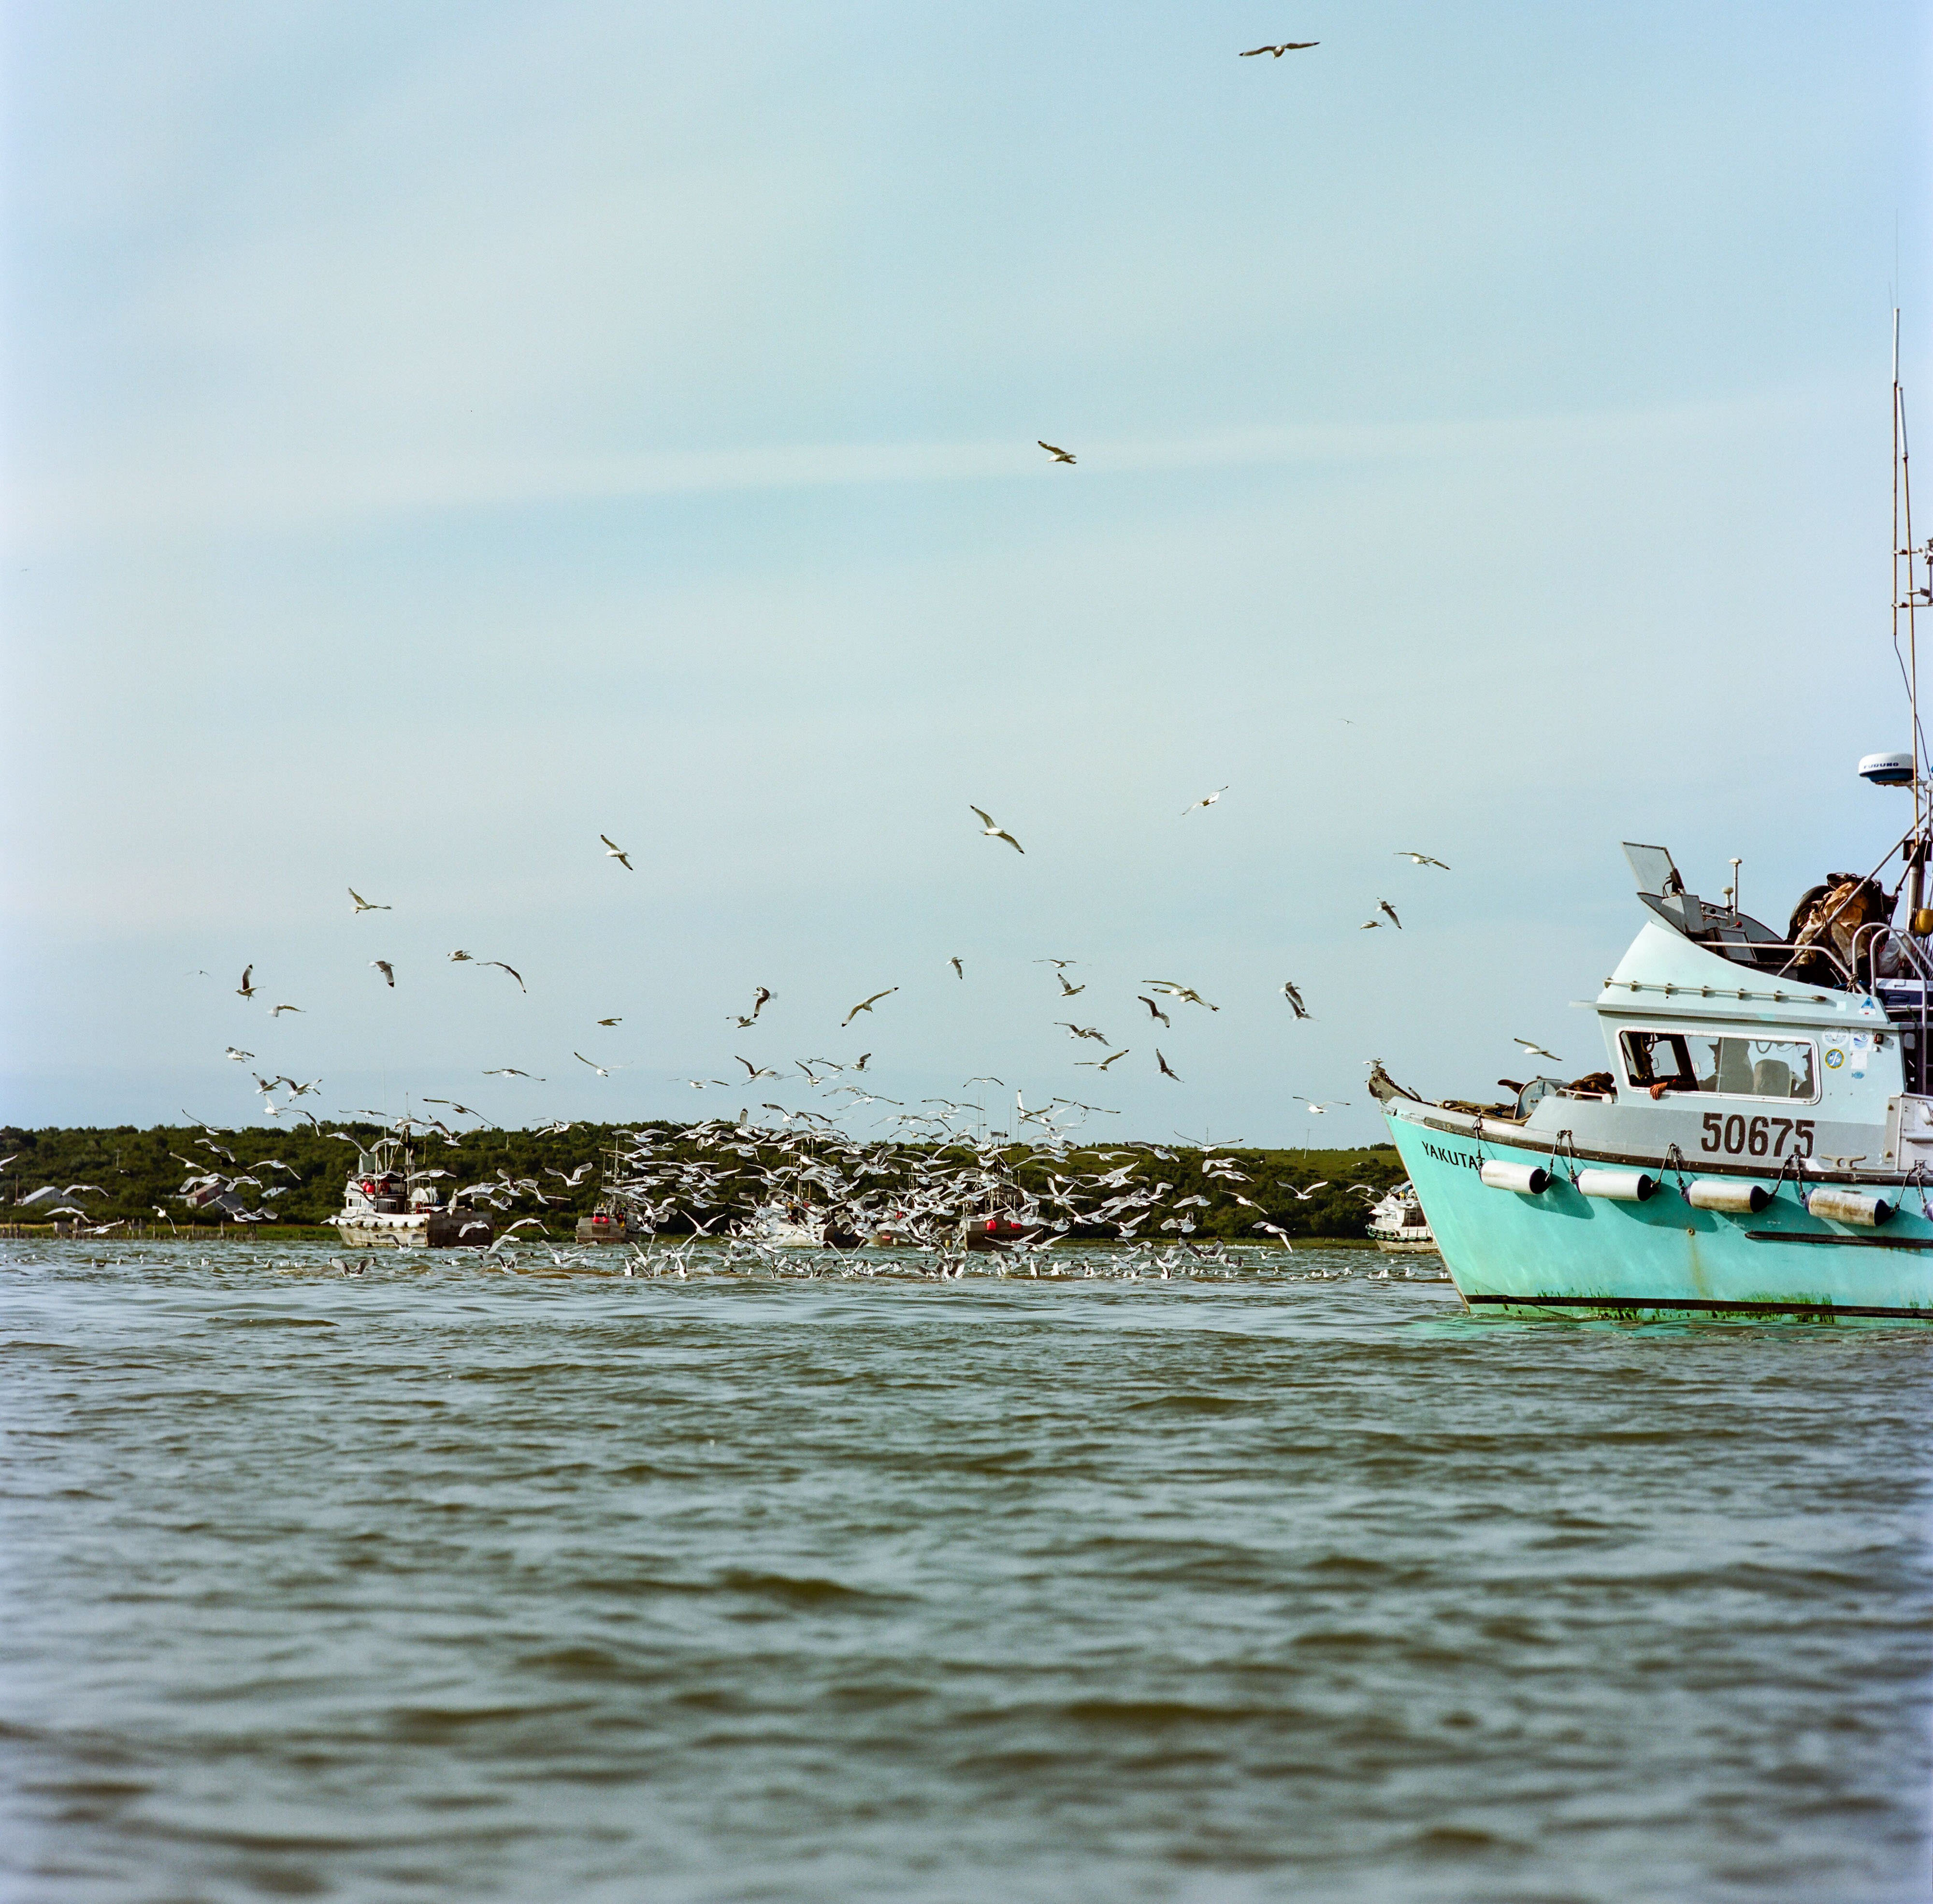 A commercial salmon fishing vessel at work, while hundreds of birds flock near the boat.